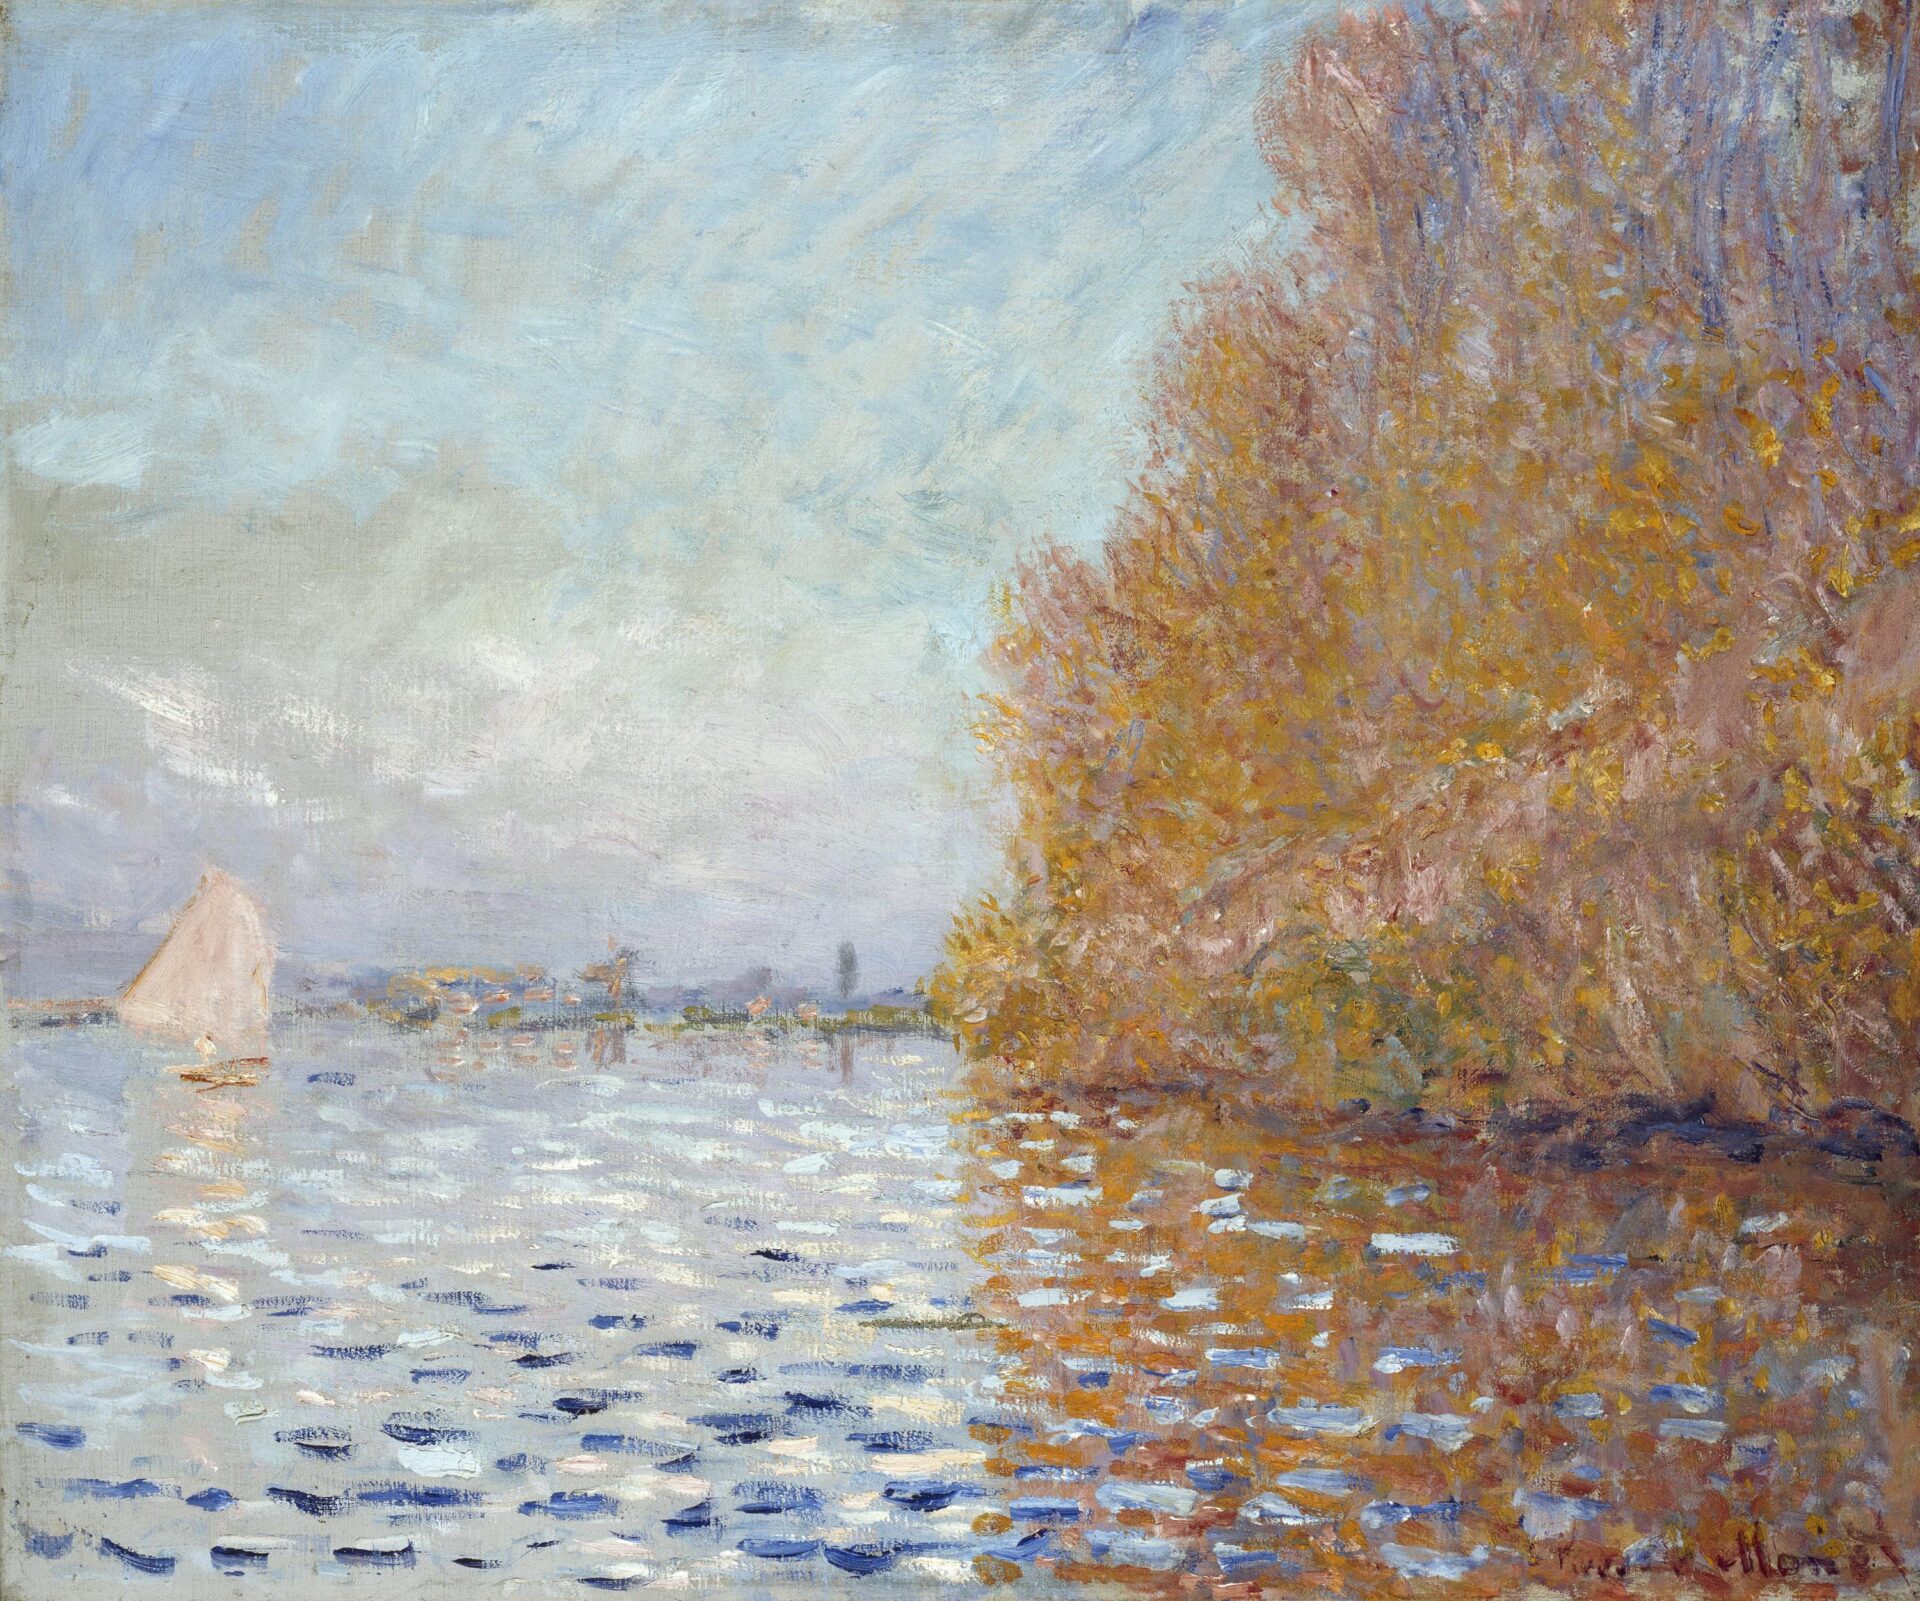 Argenteuil Basin wqith a Single Sailboat By Claude Monet